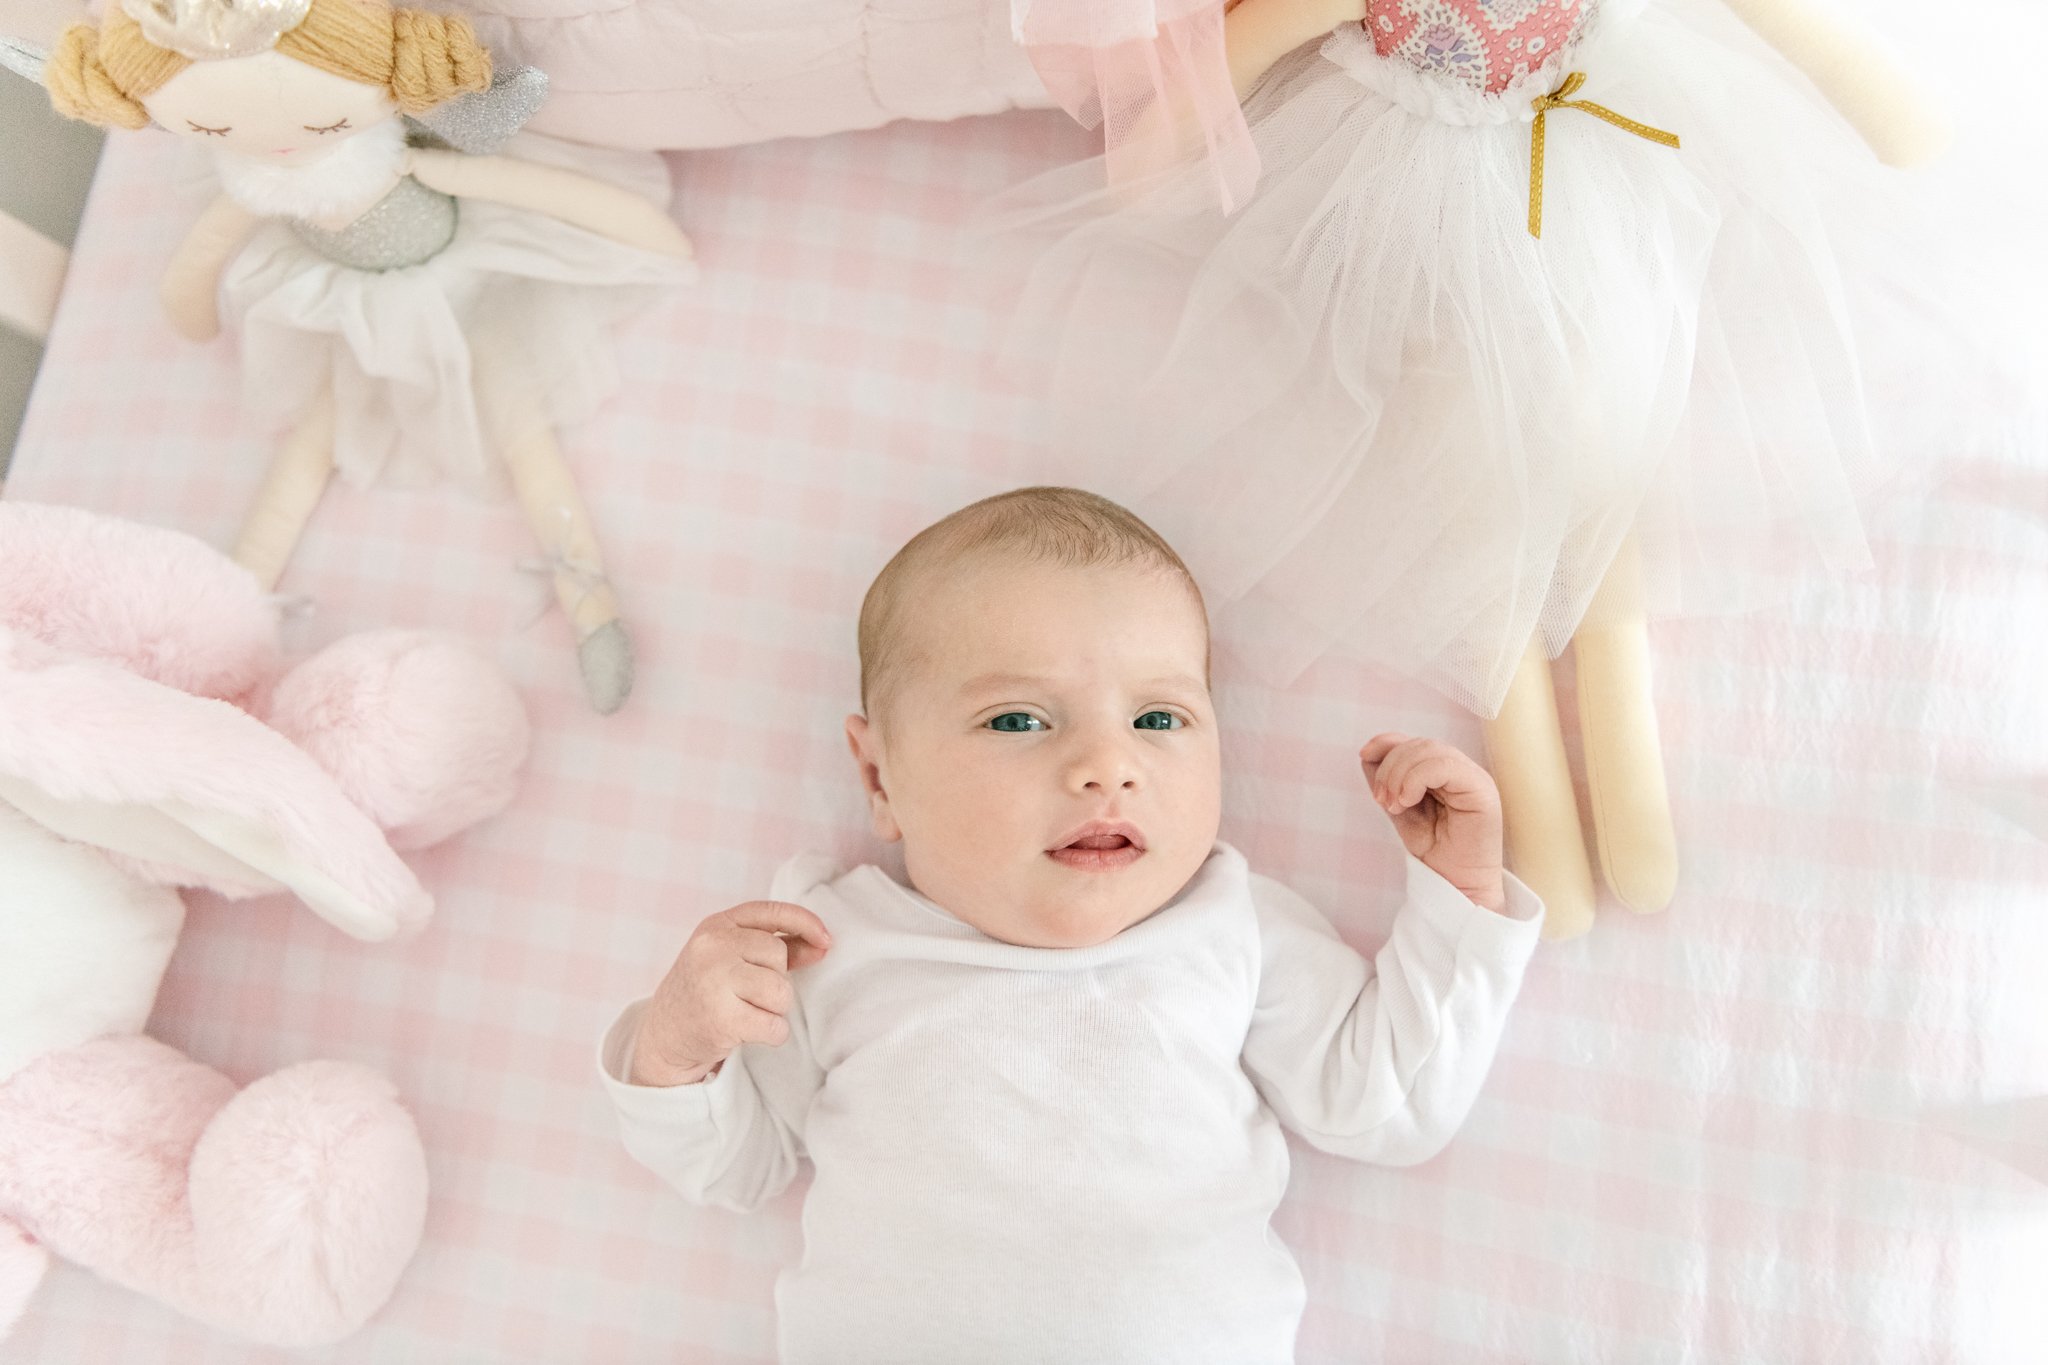  Simple, clean, crisp, and timeless newborn portraits for a classic newborn portrait in the Ma area by Nicole Hawkins Photography. white onesie pink bunny eyes open #NicoleHawkinsPhotography #NicoleHawkinsNewborns #Babygirl #Newbornfamilyportraits #C